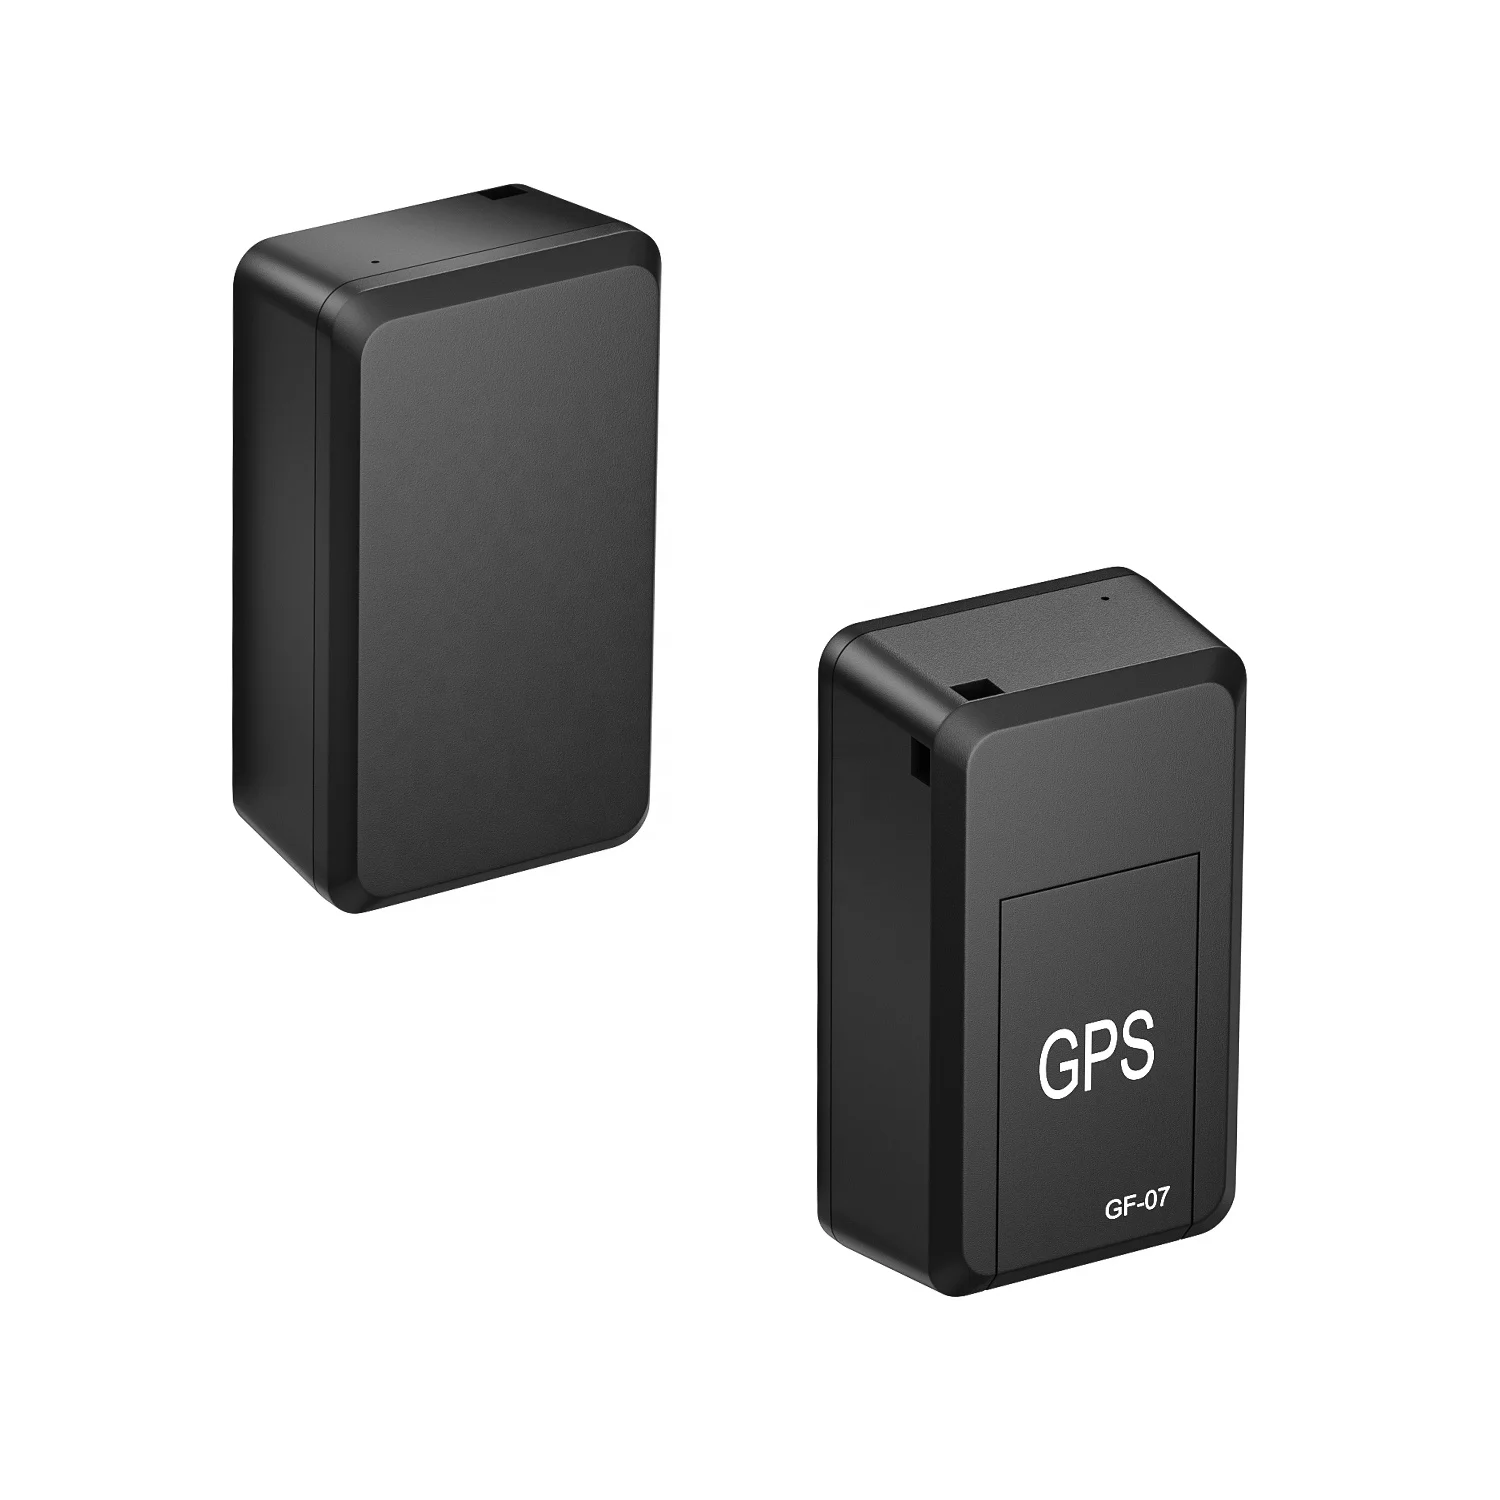 Products Gps Gf-07 Tracker Which Can Get Really - Buy Gps,Mini Gps Gf07 Product Alibaba.com